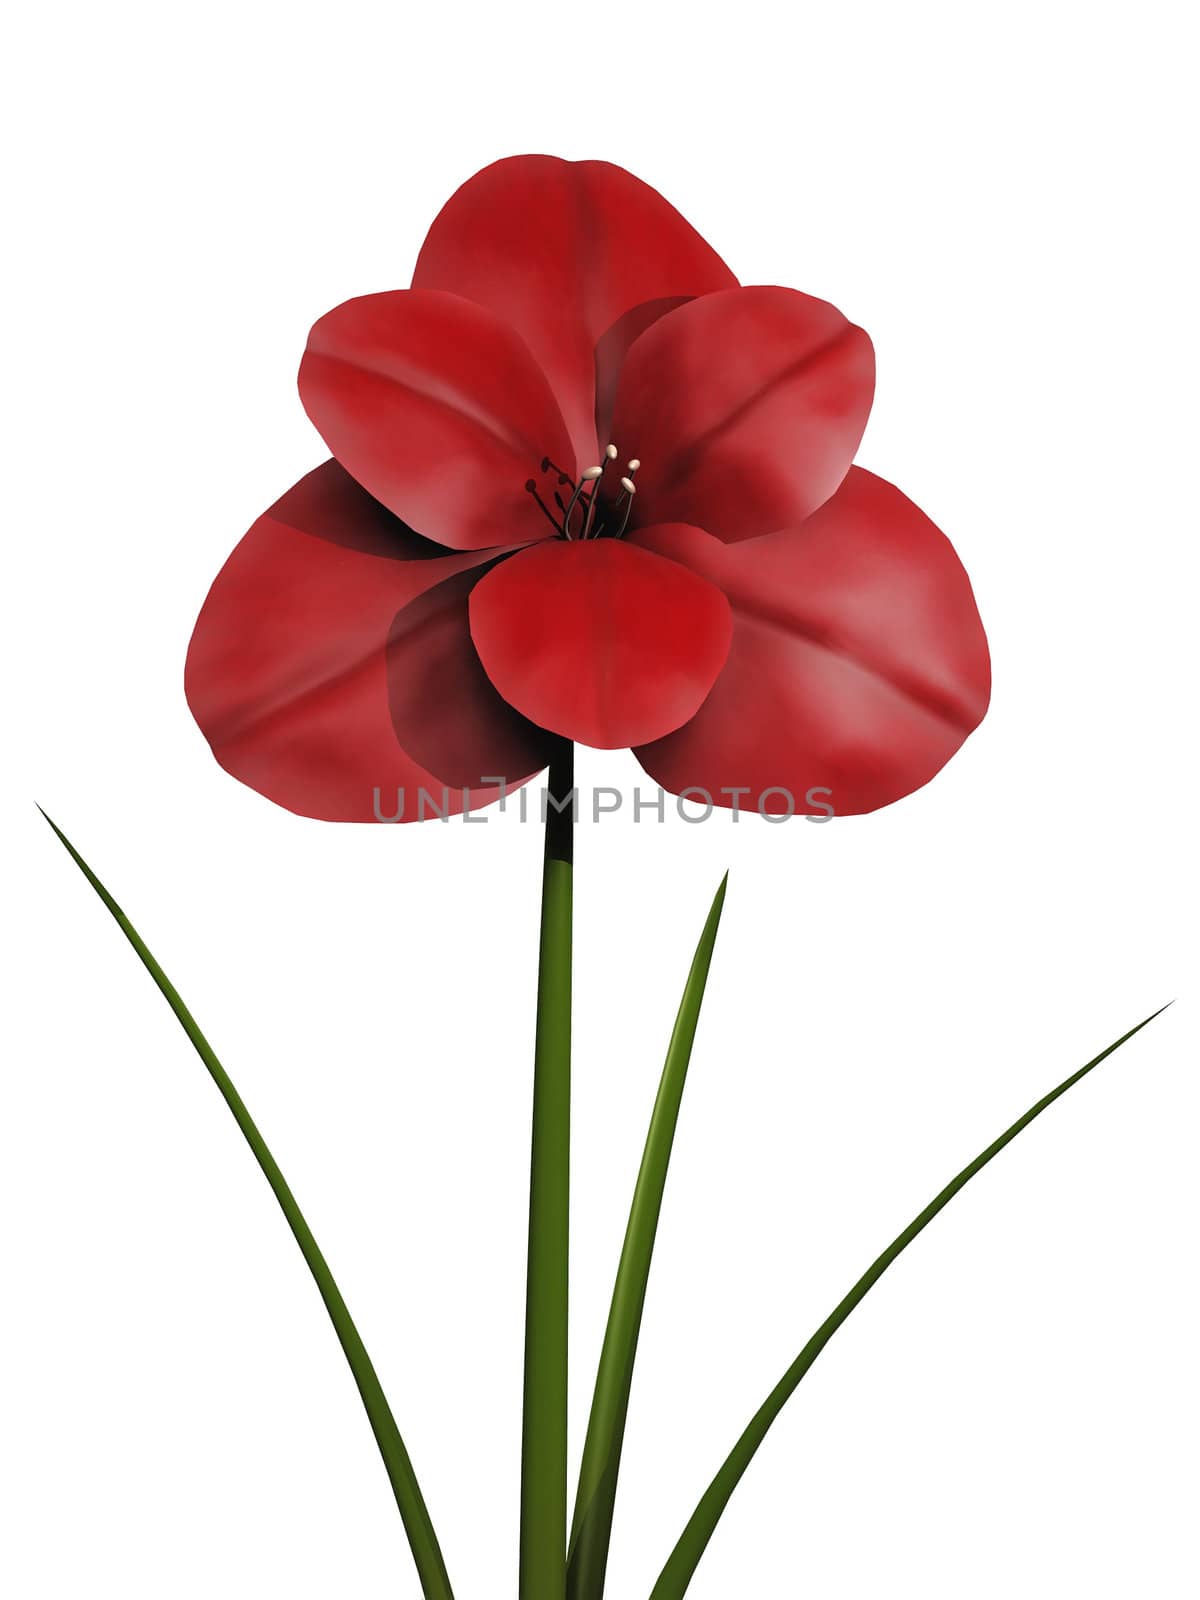 red flower on a white background by njaj